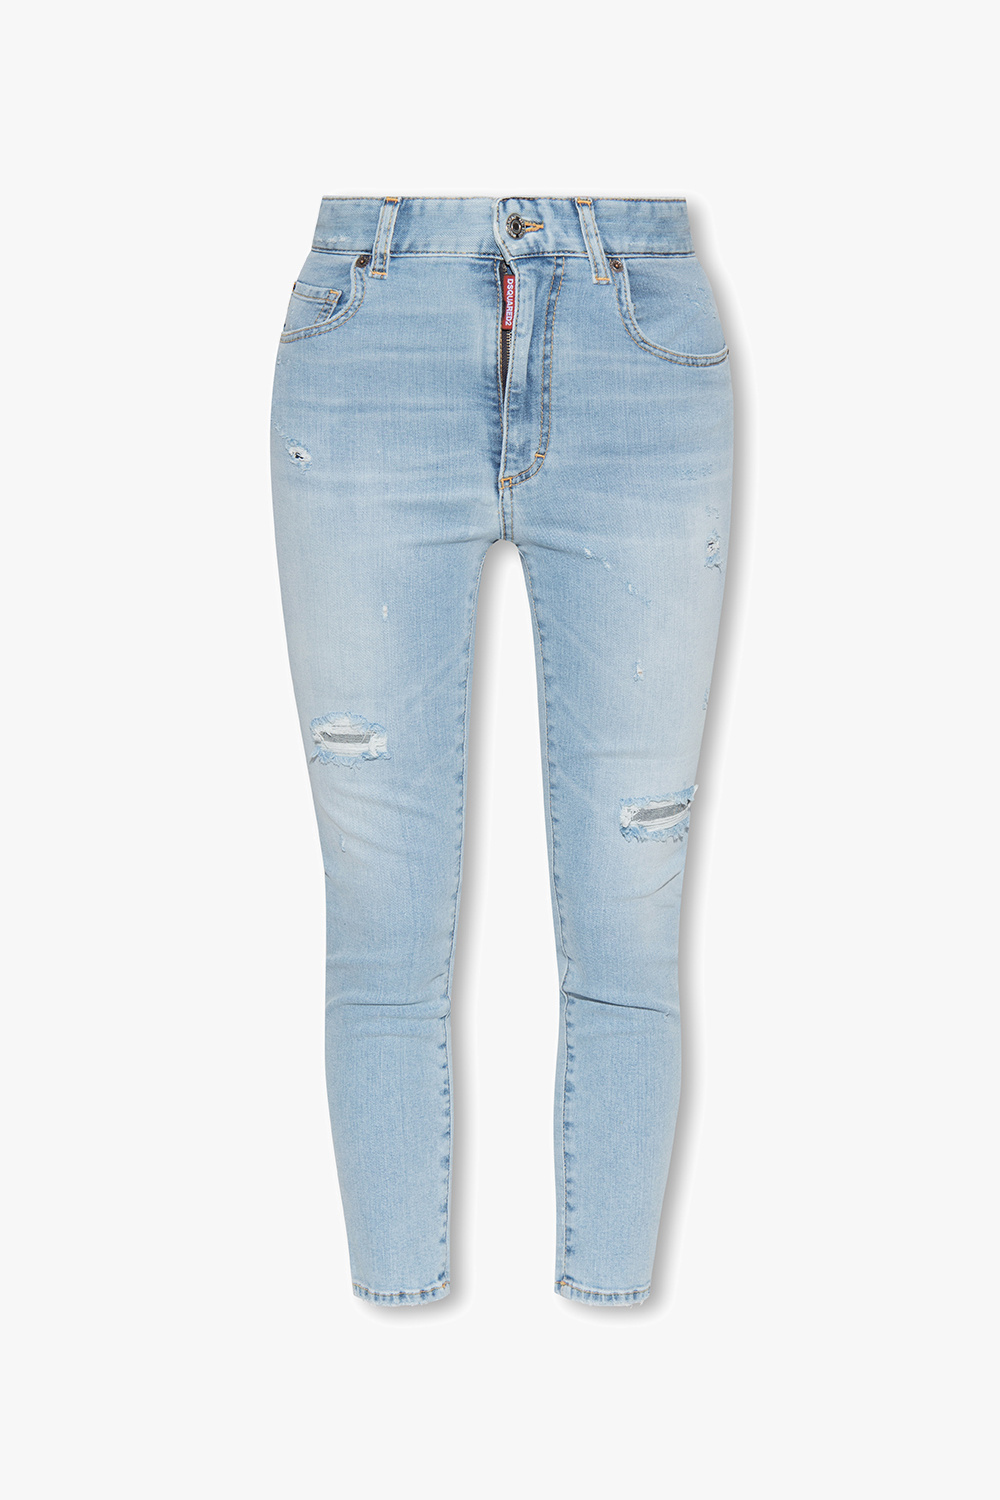 VbjdevelopmentsShops Denmark - Love this jeans so comfy soft stretchy  materal excellent fit - Light blue 'Cropped Twiggy' jeans Dsquared2